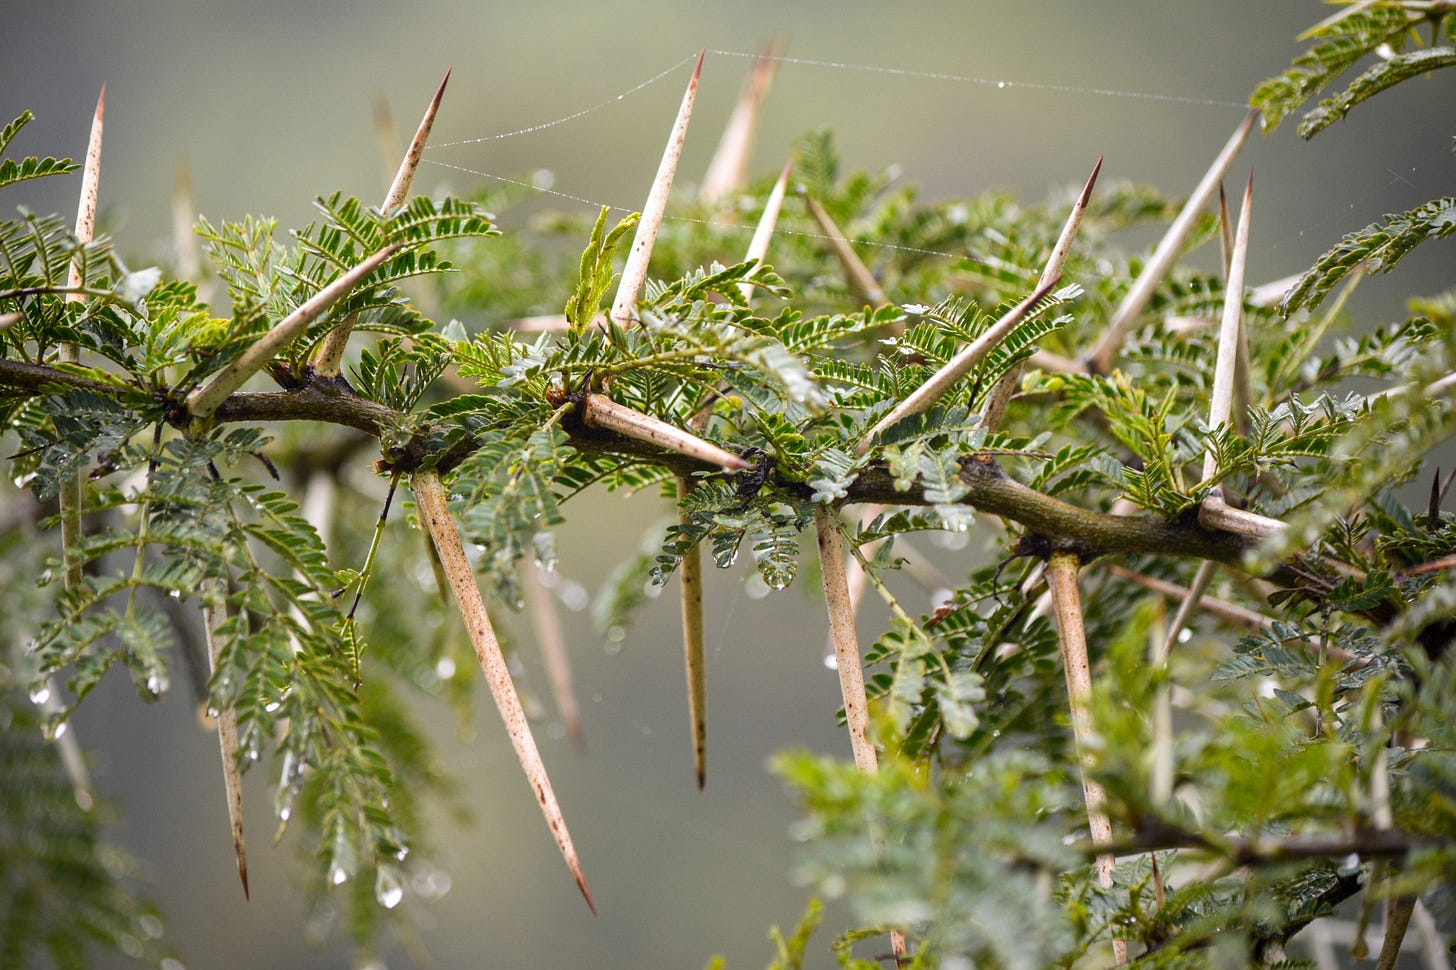 A branch of an acacia tree. Thorns and dewdrops and spiderwebs.